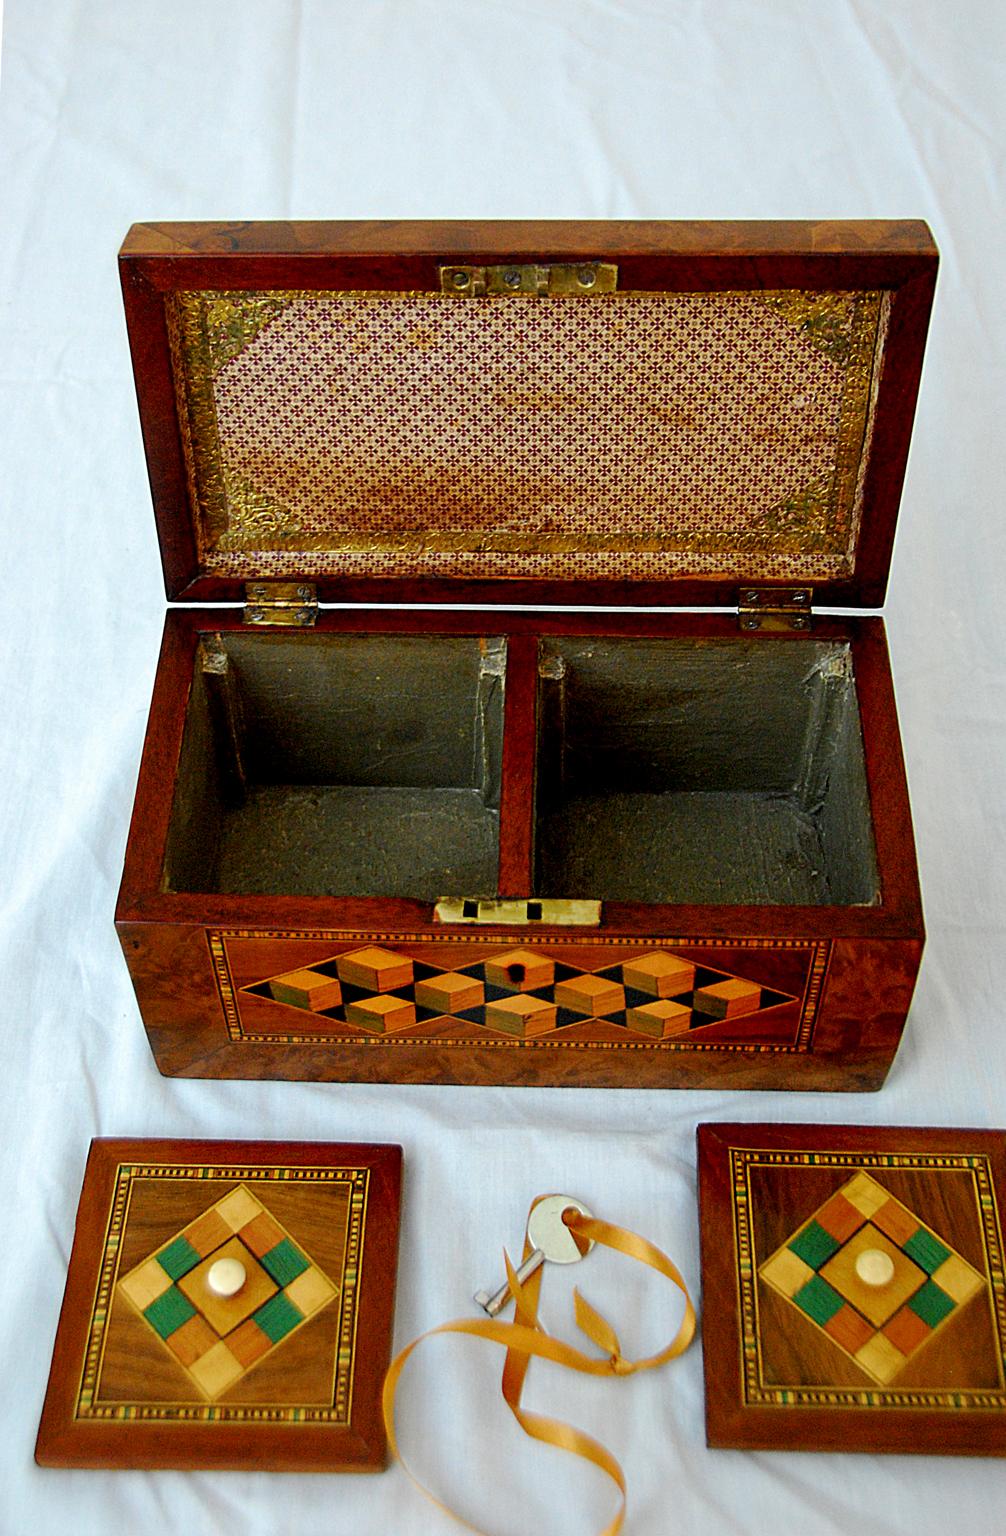 Burl English 19th Century Trinity House Tea Caddy Ship and Perspective Cube Inlay